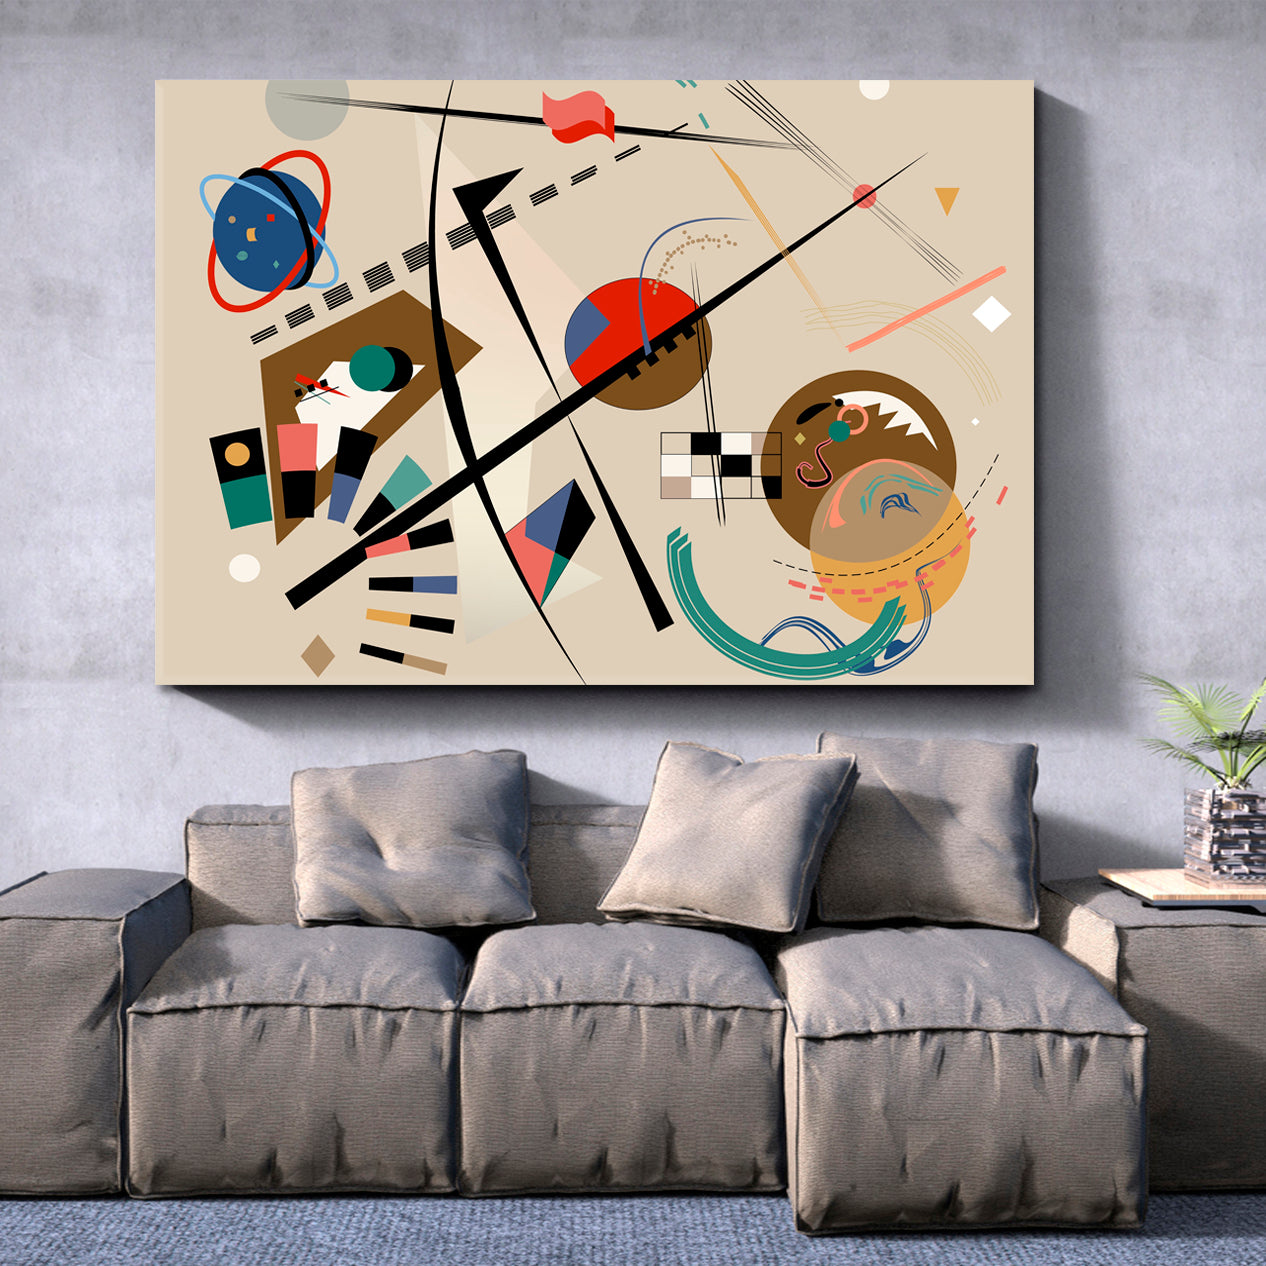 Geometric Curved Shapes Expressionism Abstract Style Contemporary Art Artesty 1 panel 24" x 16" 